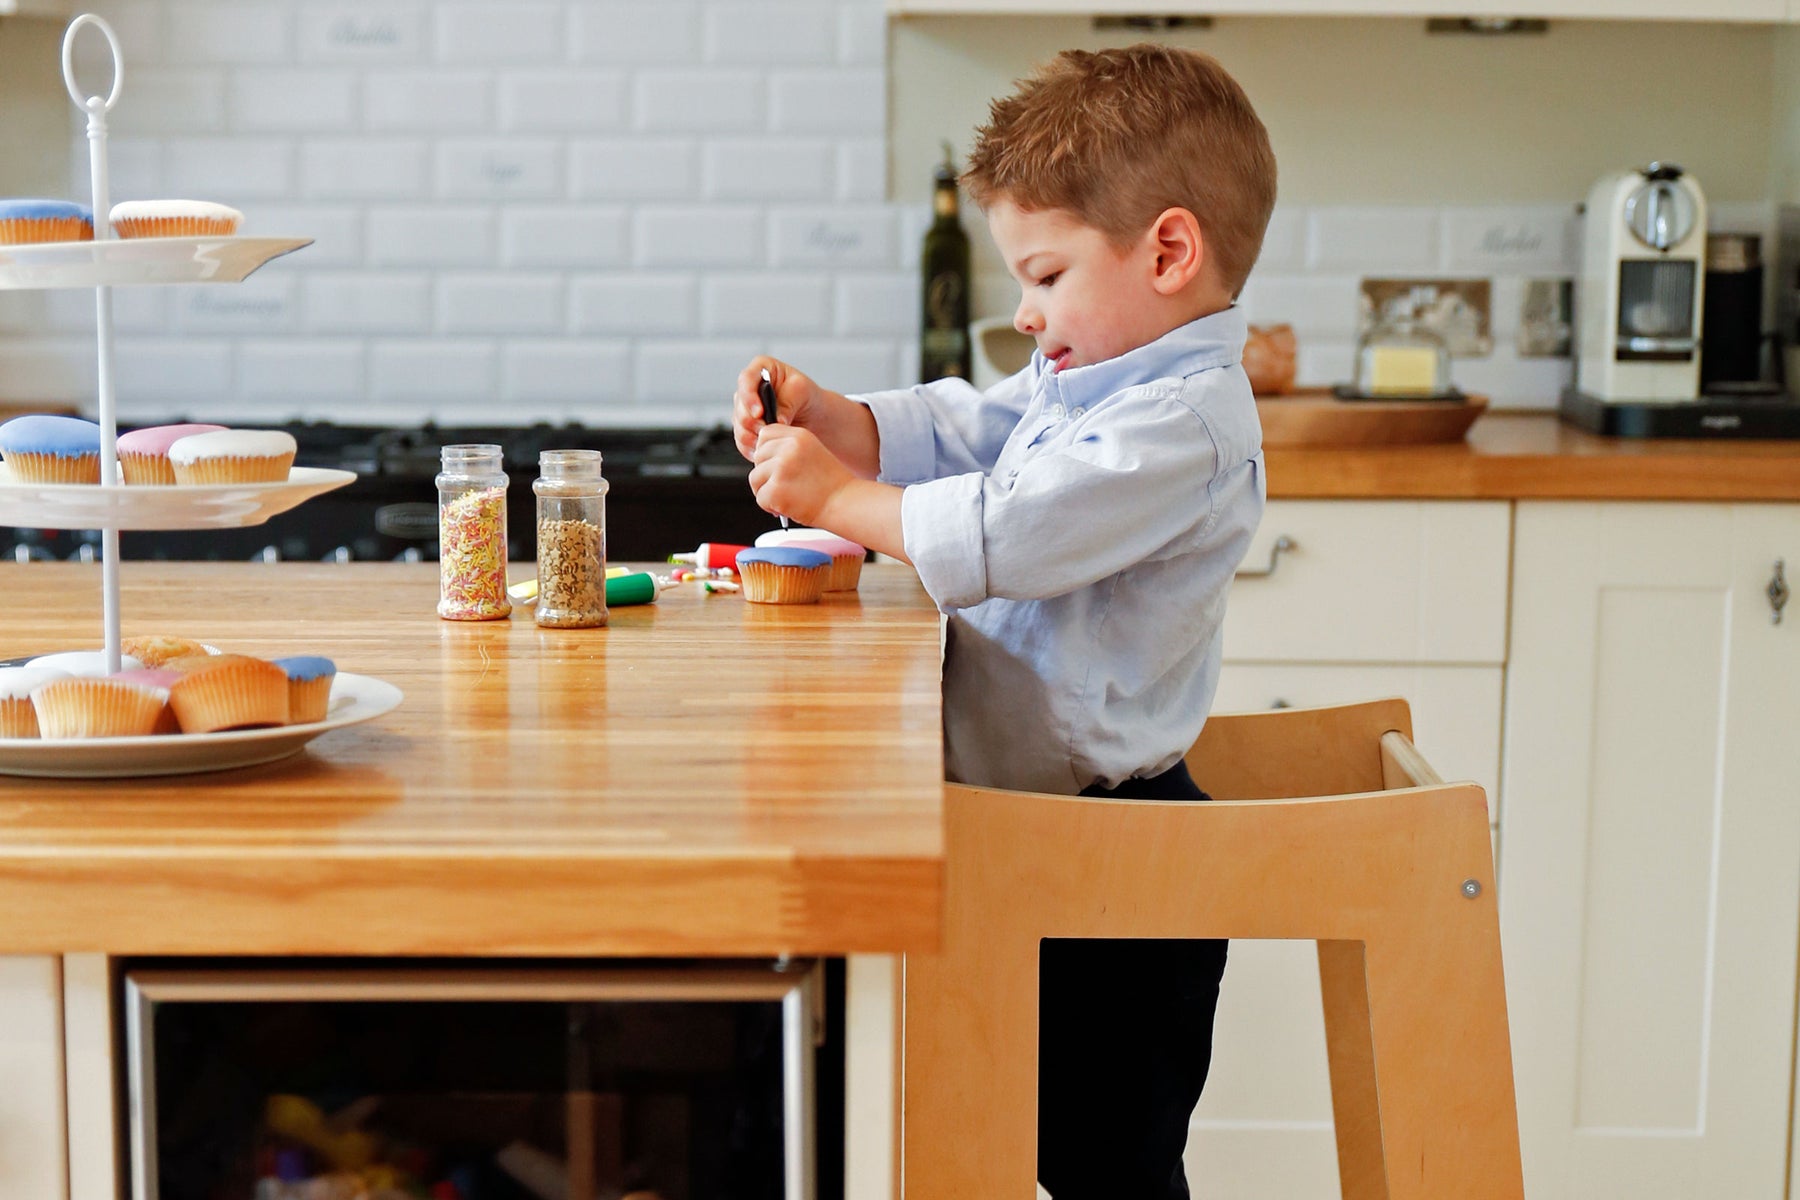 Picture of a child in the Stepup Baby Toddler Tower baking and decorating cakes at the kitchen counter.  In a safe way with adjustable height platform 